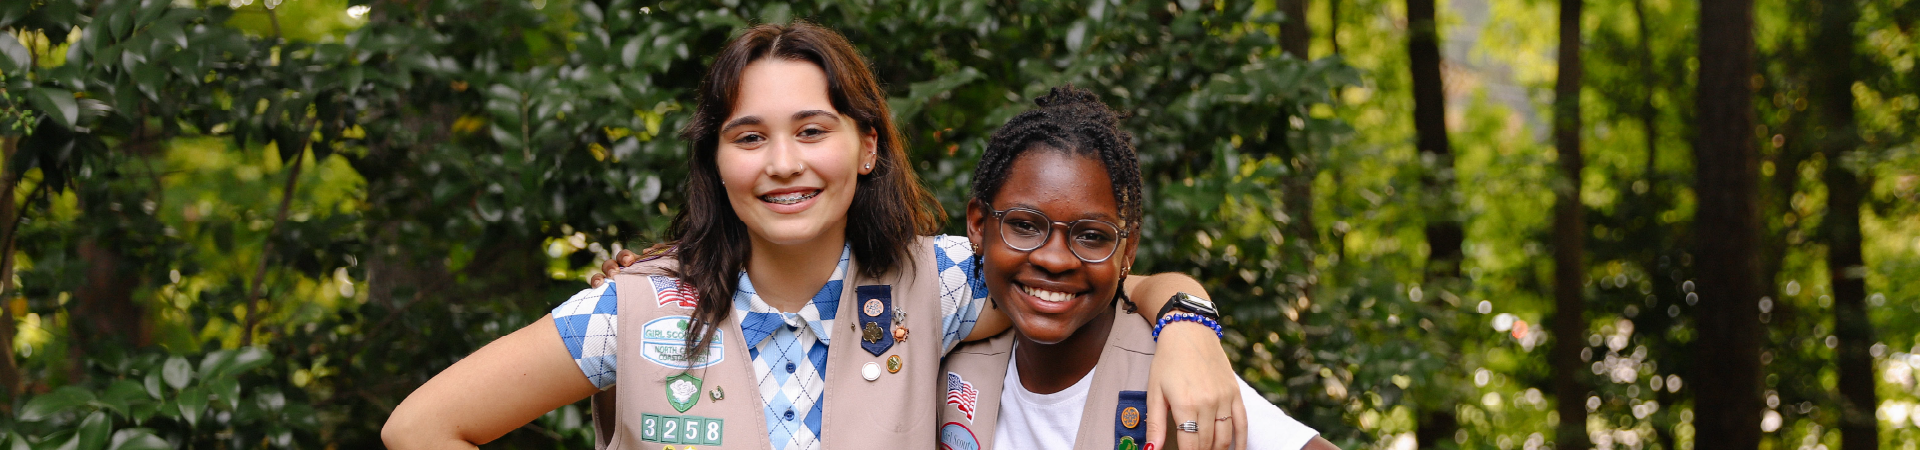  Group of Junior Girl Scouts smiling and laughing outdoors 